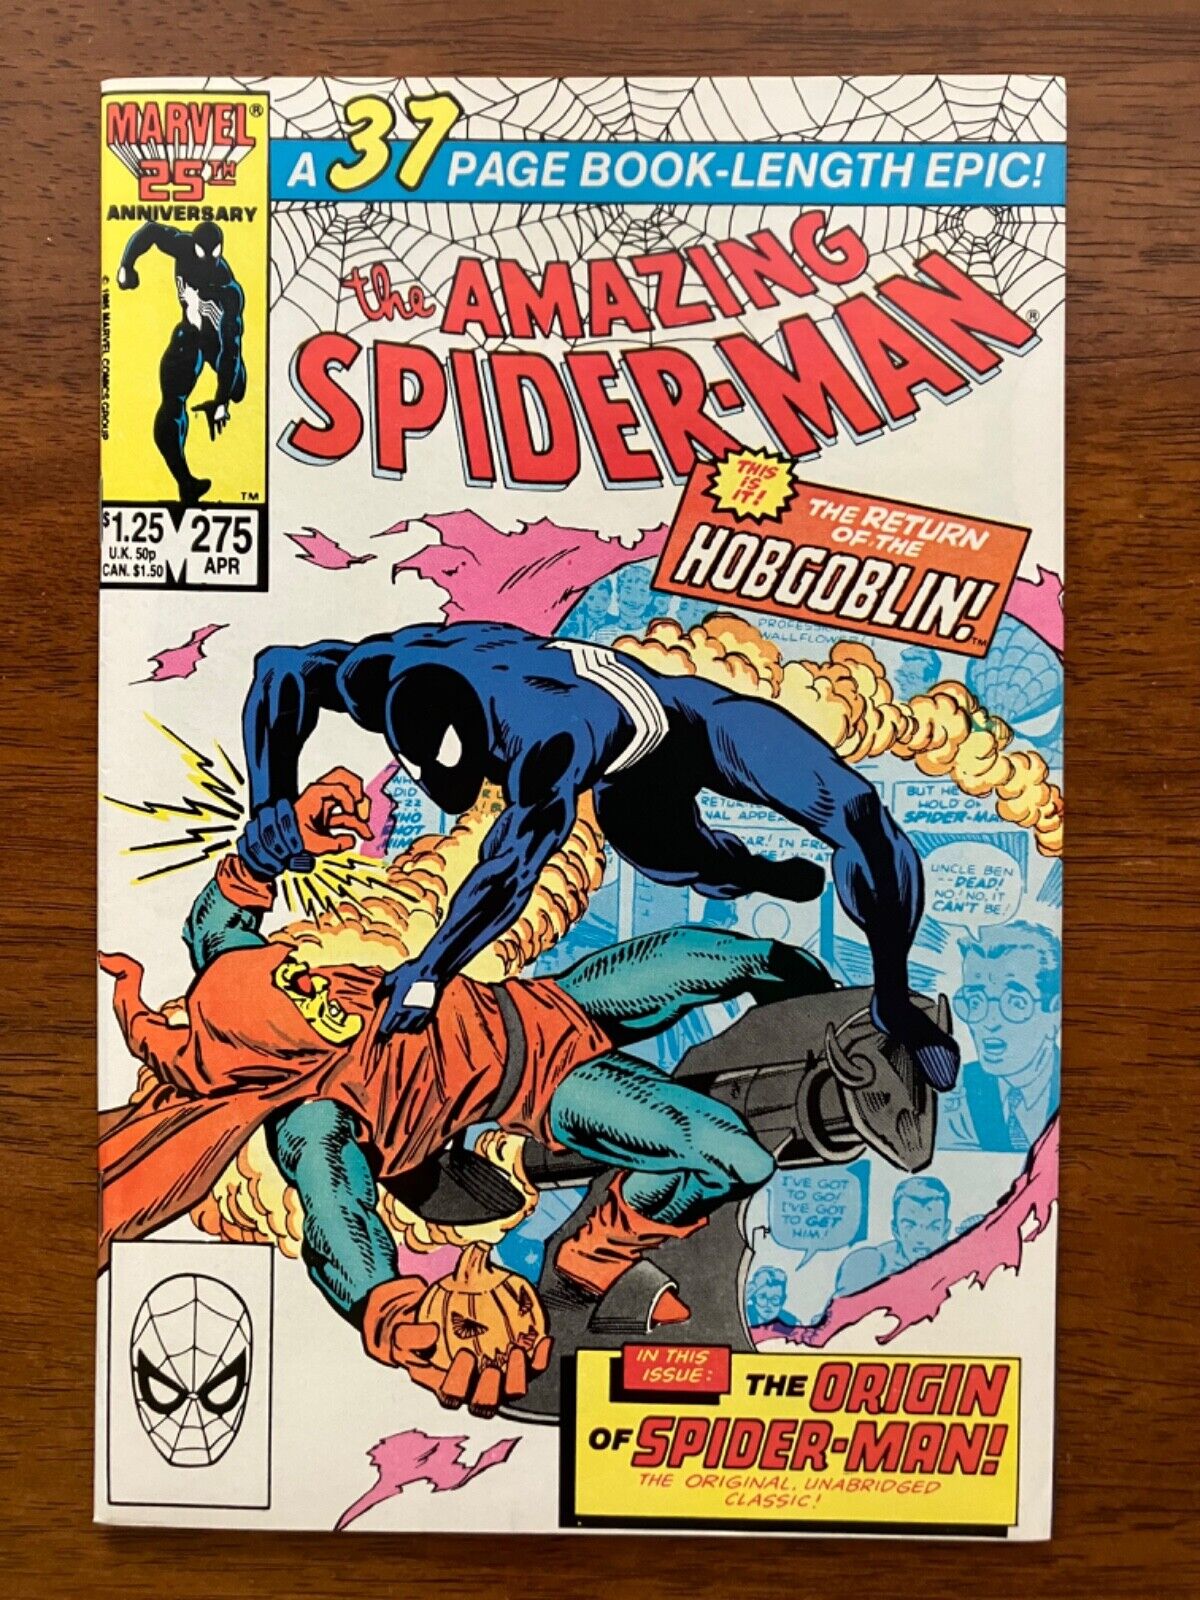 A. SPIDER-MAN # 275 Mint- 9.9 White Pages  White Cover  Newstand Color Gloss 